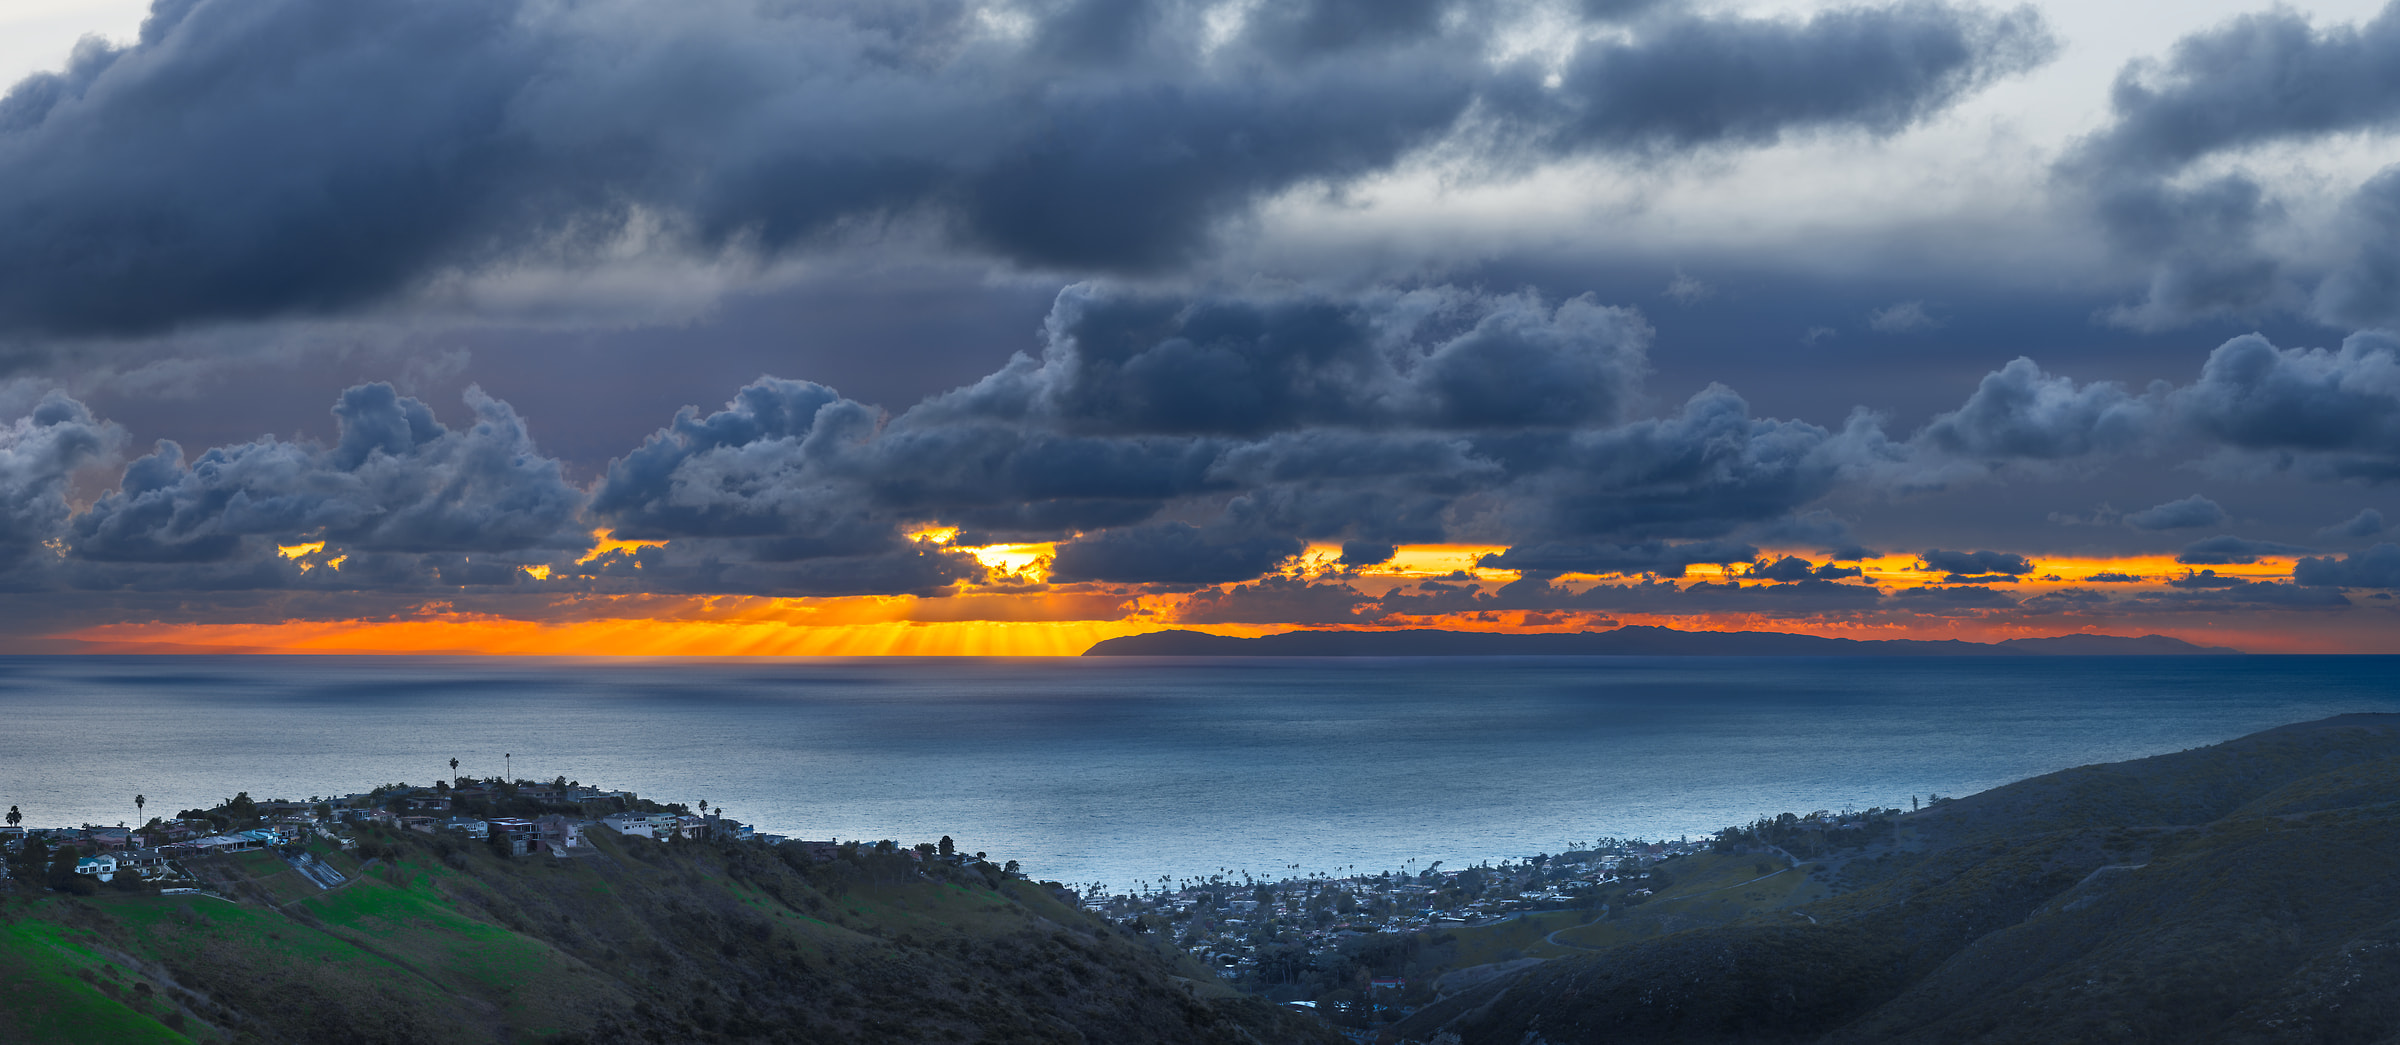 469 megapixels! A very high resolution, large-format VAST photo print of a sunset over the Pacific Ocean with Laguna Beach in the foreground; photograph created by Jim Tarpo in Top of the world, Laguna Beach, California.